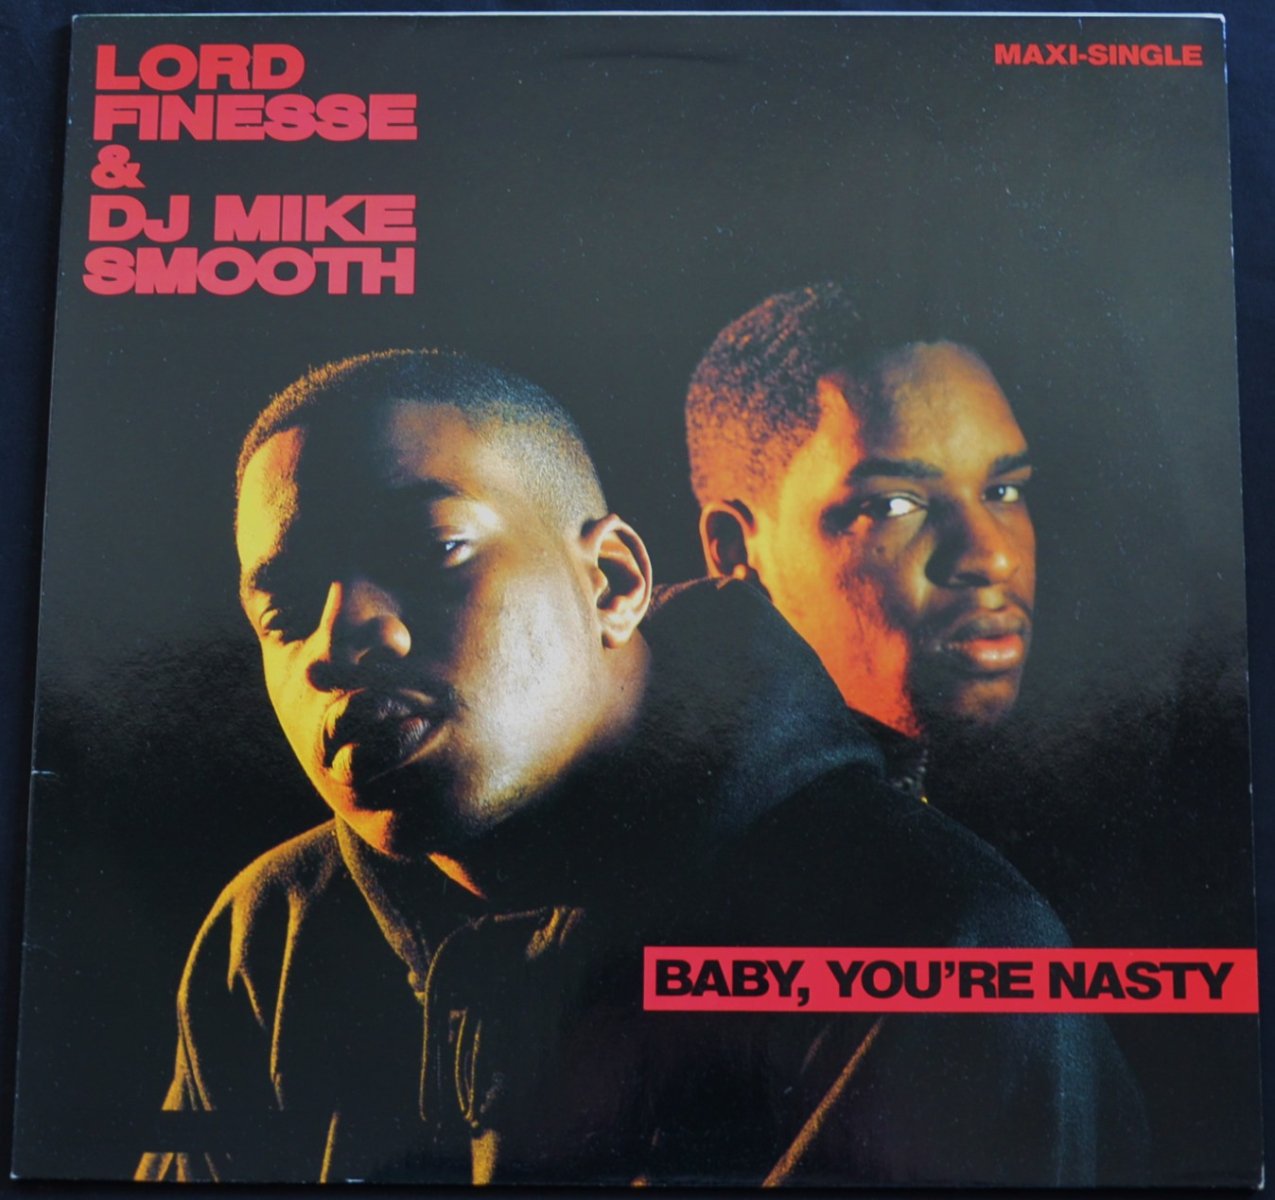 LORD FINESSE & DJ MIKE SMOOTH / BABY, YOU'RE NASTY / KEEP IT FLOWING / A LESSON TO BE TAUGHT (12